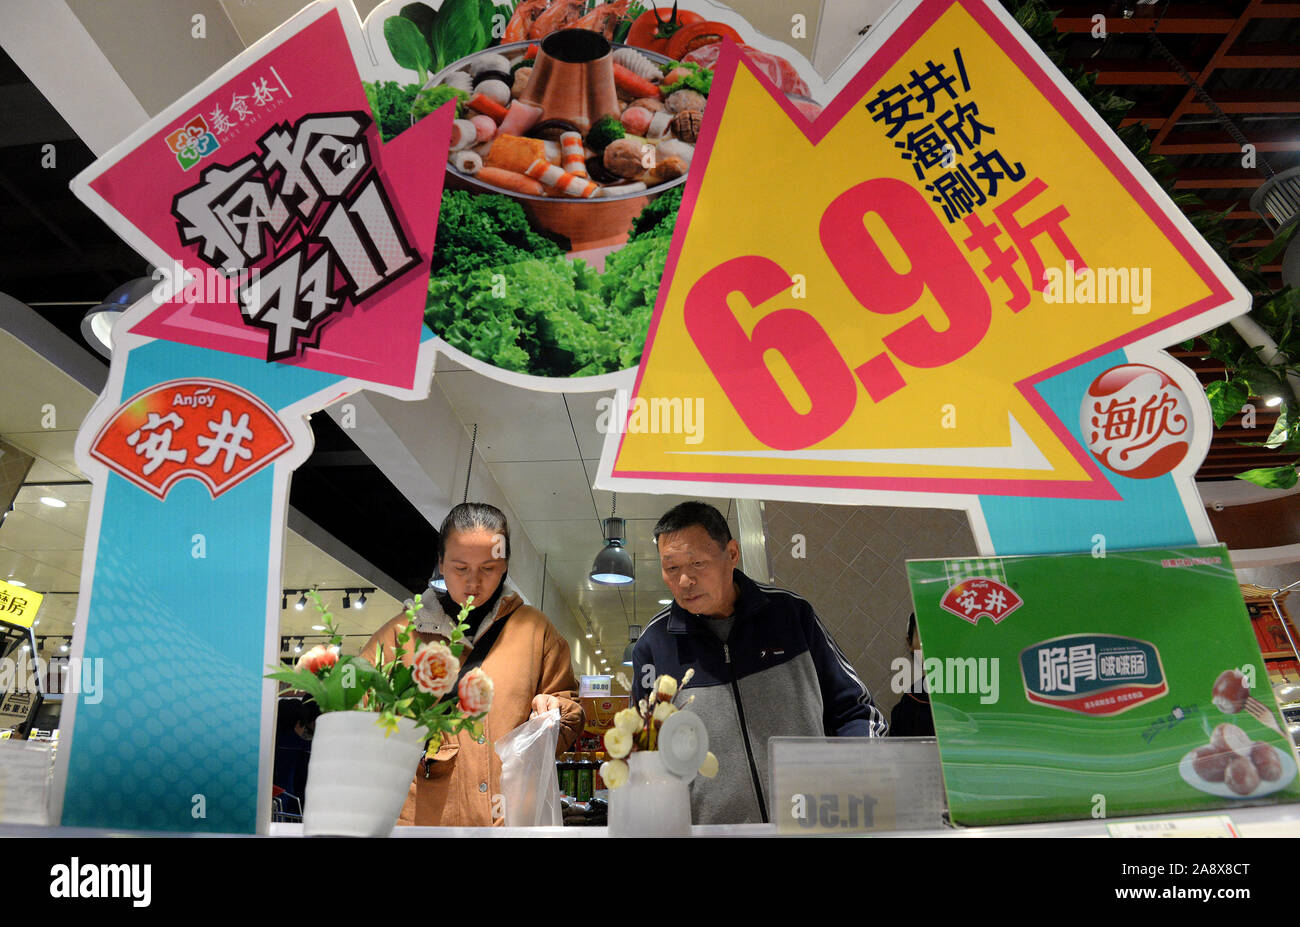 November 11, 2019, Hebei, China: During ''Double 11'' some shopping malls and supermarkets in Handan, Hebei, carry out large scale promotional activities to attract consumers. (Credit Image: © SIPA Asia via ZUMA Wire) Stock Photo